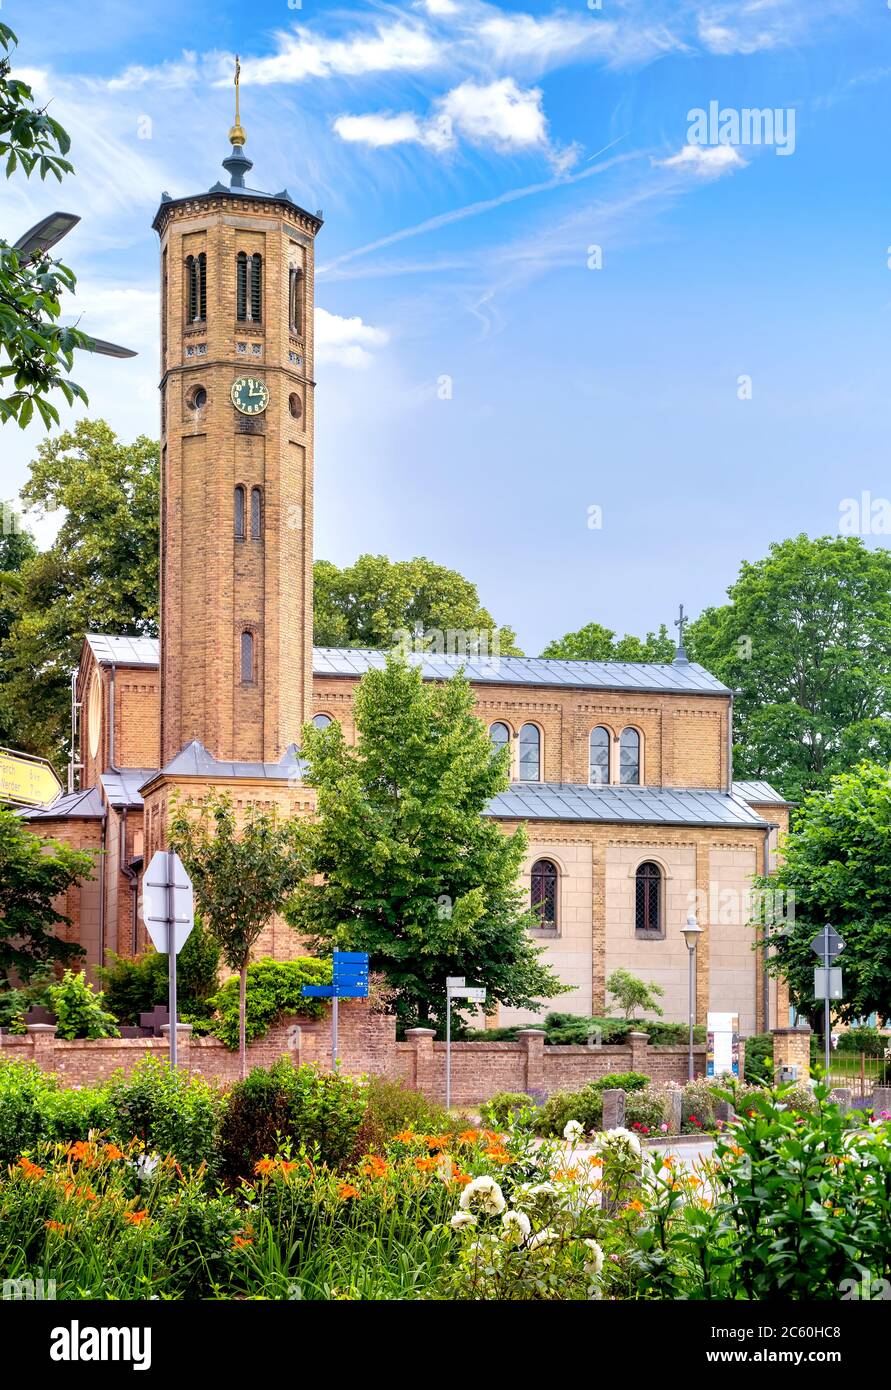 The historical village church in Caputh-Schwielowsee in Brandenburg an der Havel, Germany Stock Photo